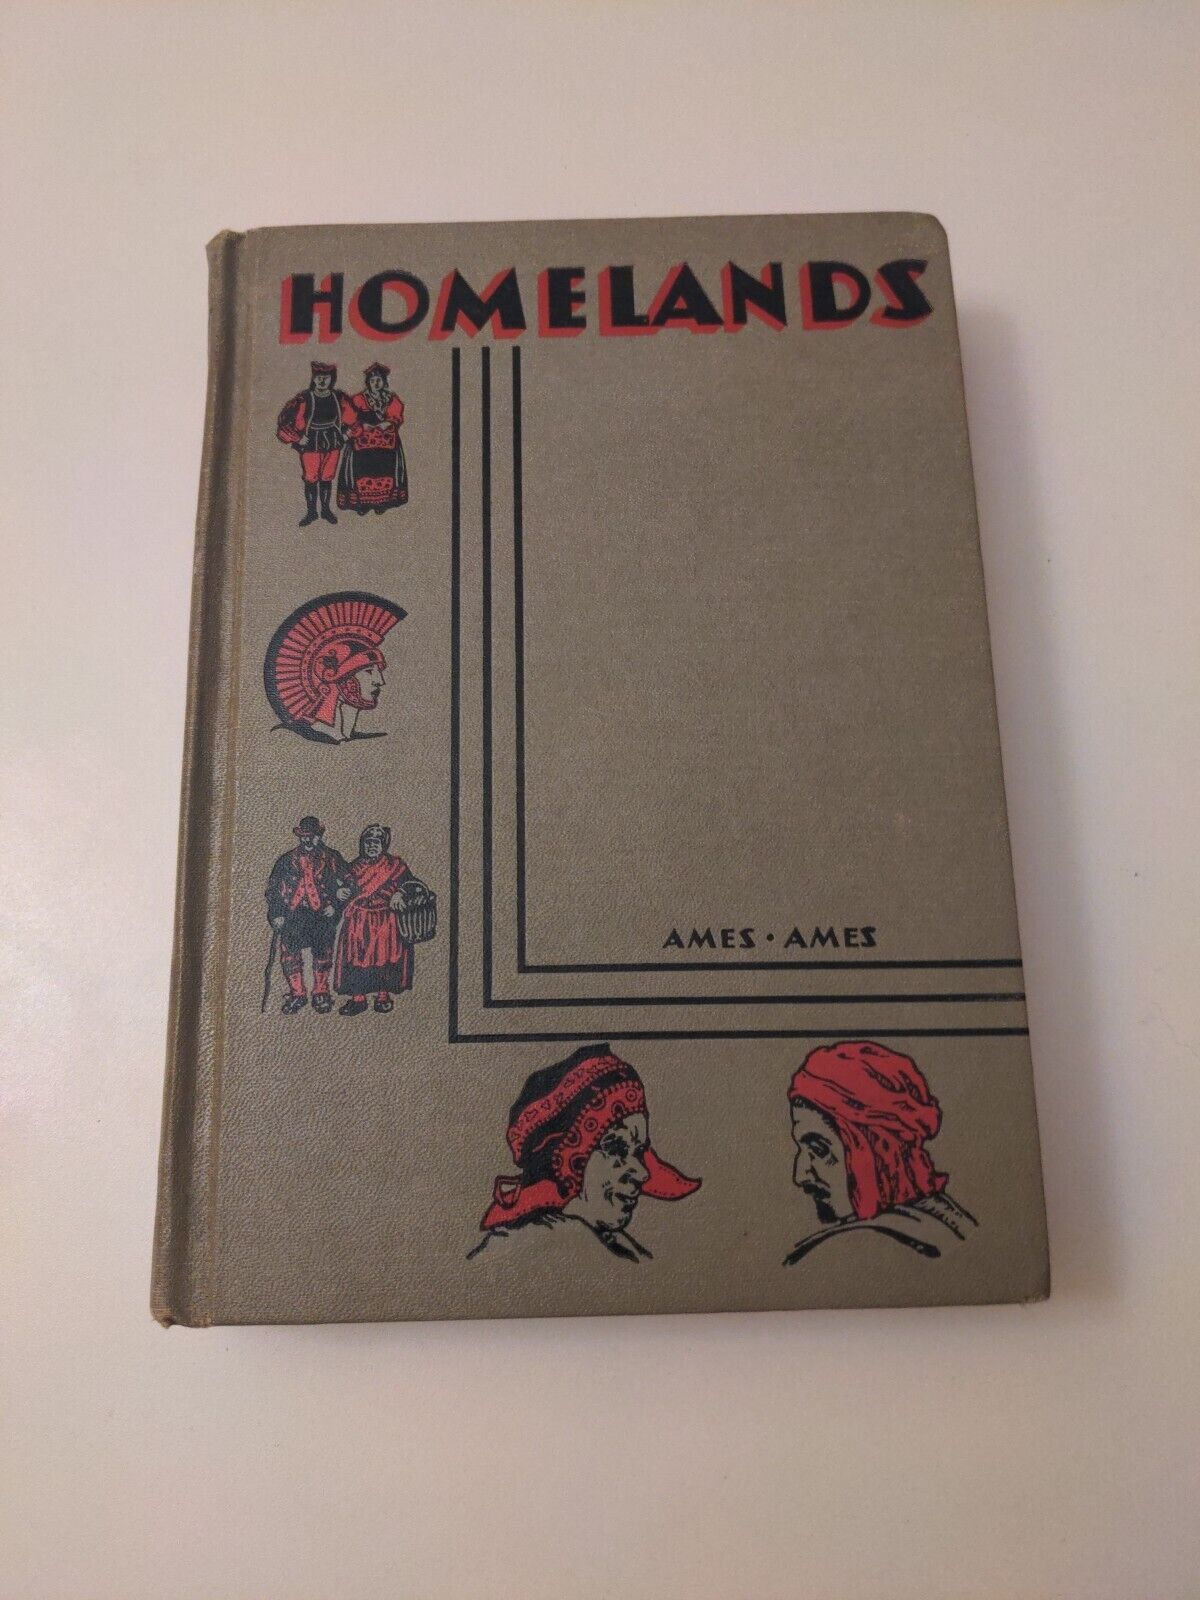 Homelands By Merlin And Jesse Ames 1939 Antique Hardcover Book